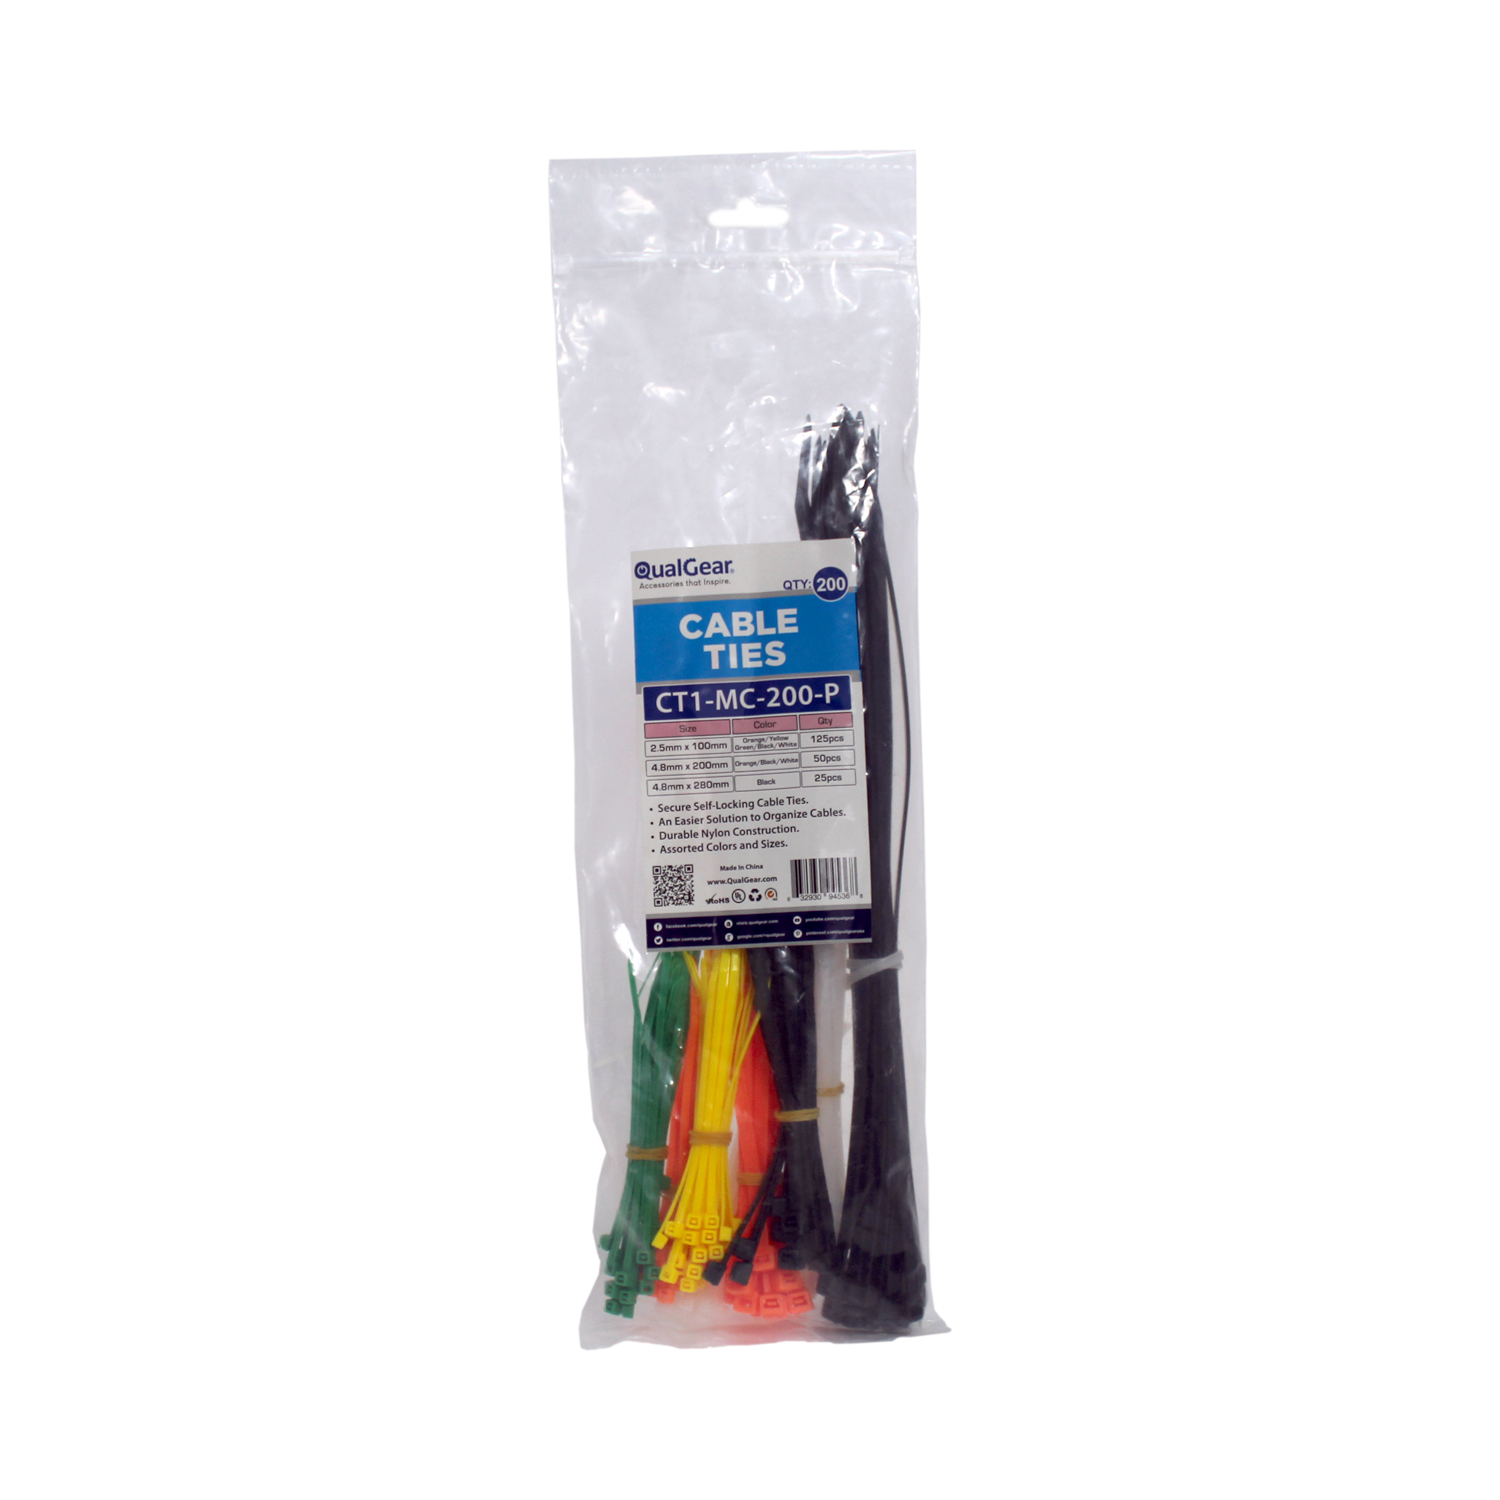 QualGear CT1-MC-200-P Assorted Self-Locking Cable Ties (Pack of 200)